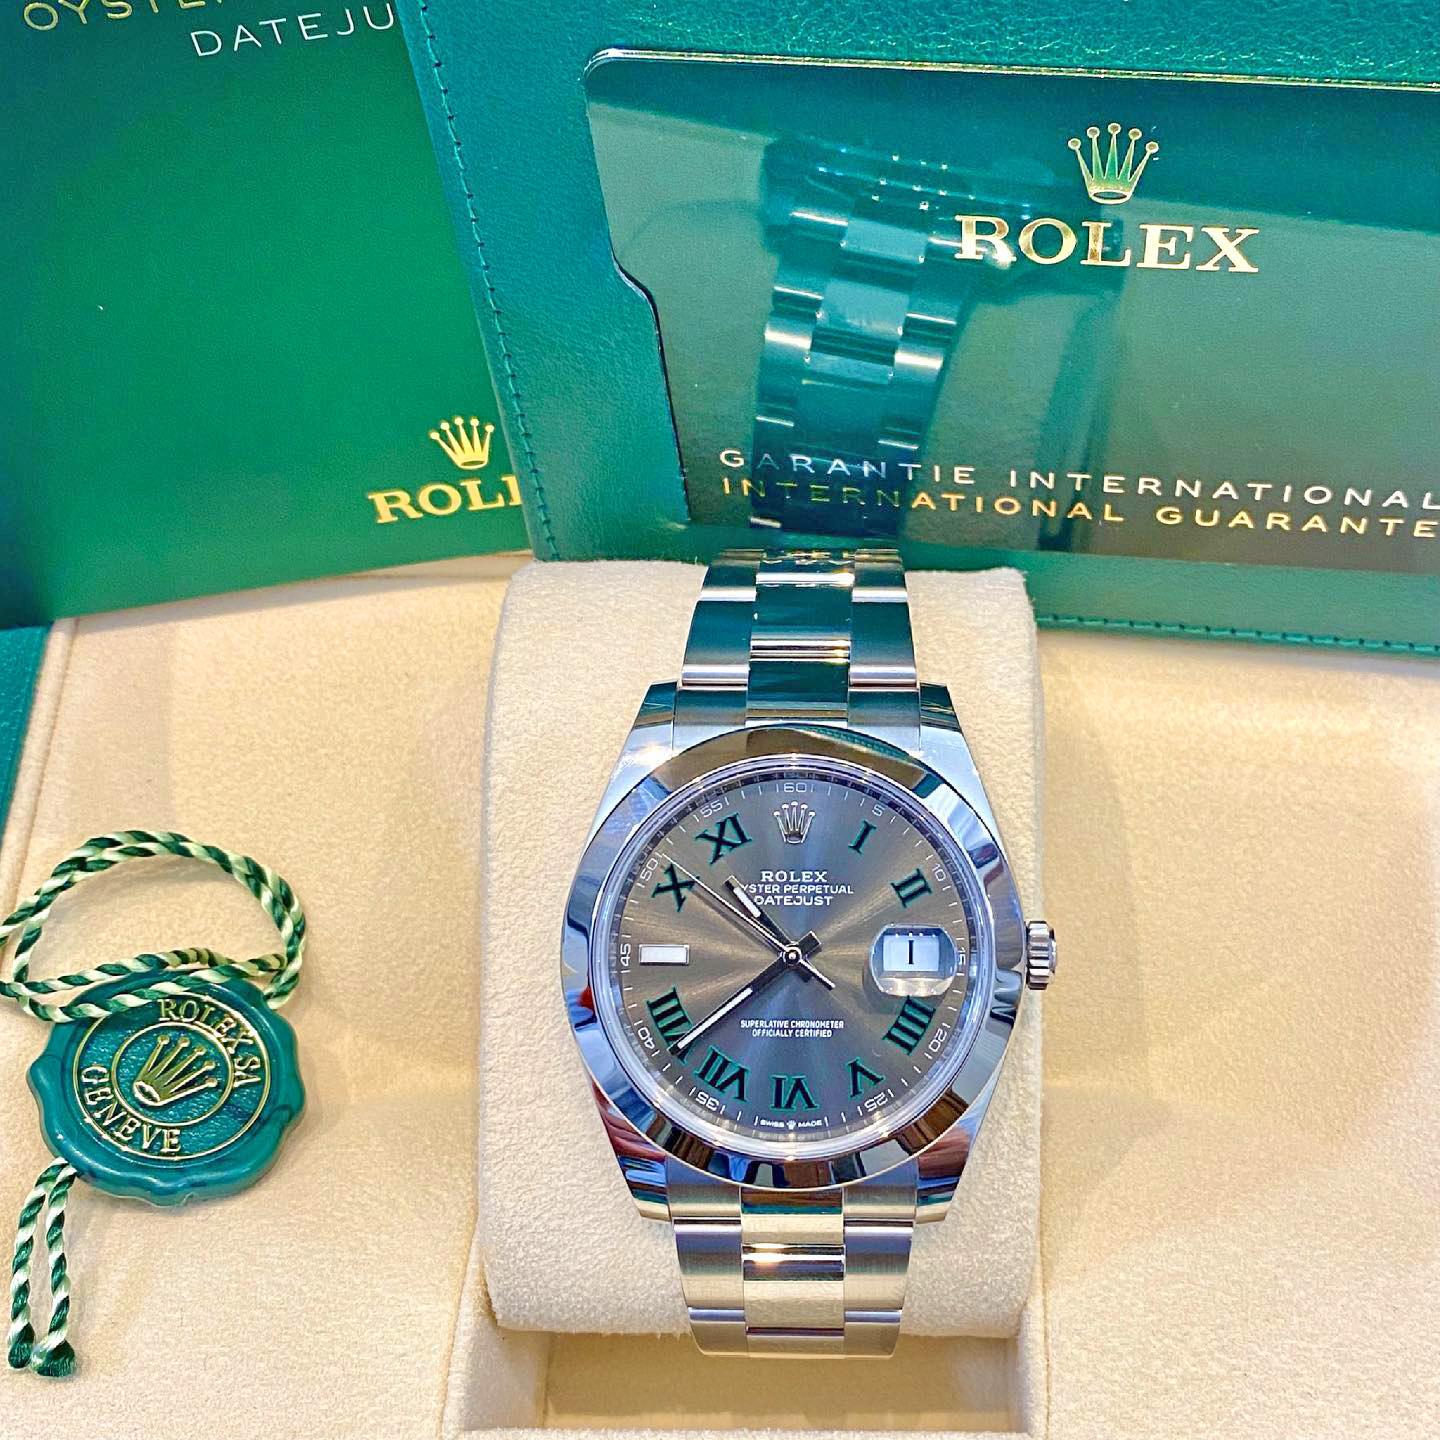 Unworn Classic watch Rolex Datejust 41, Oystersteel, Ref# 126300-0013 - luxury, elegance and practicality.

Make: Rolex
Model: Datejust 41
Reference: 126300-0013
Diameter: 41 mm
Case material: Oystersteel
Dial color: Slate
Bezel Type: Smooth
Bezel